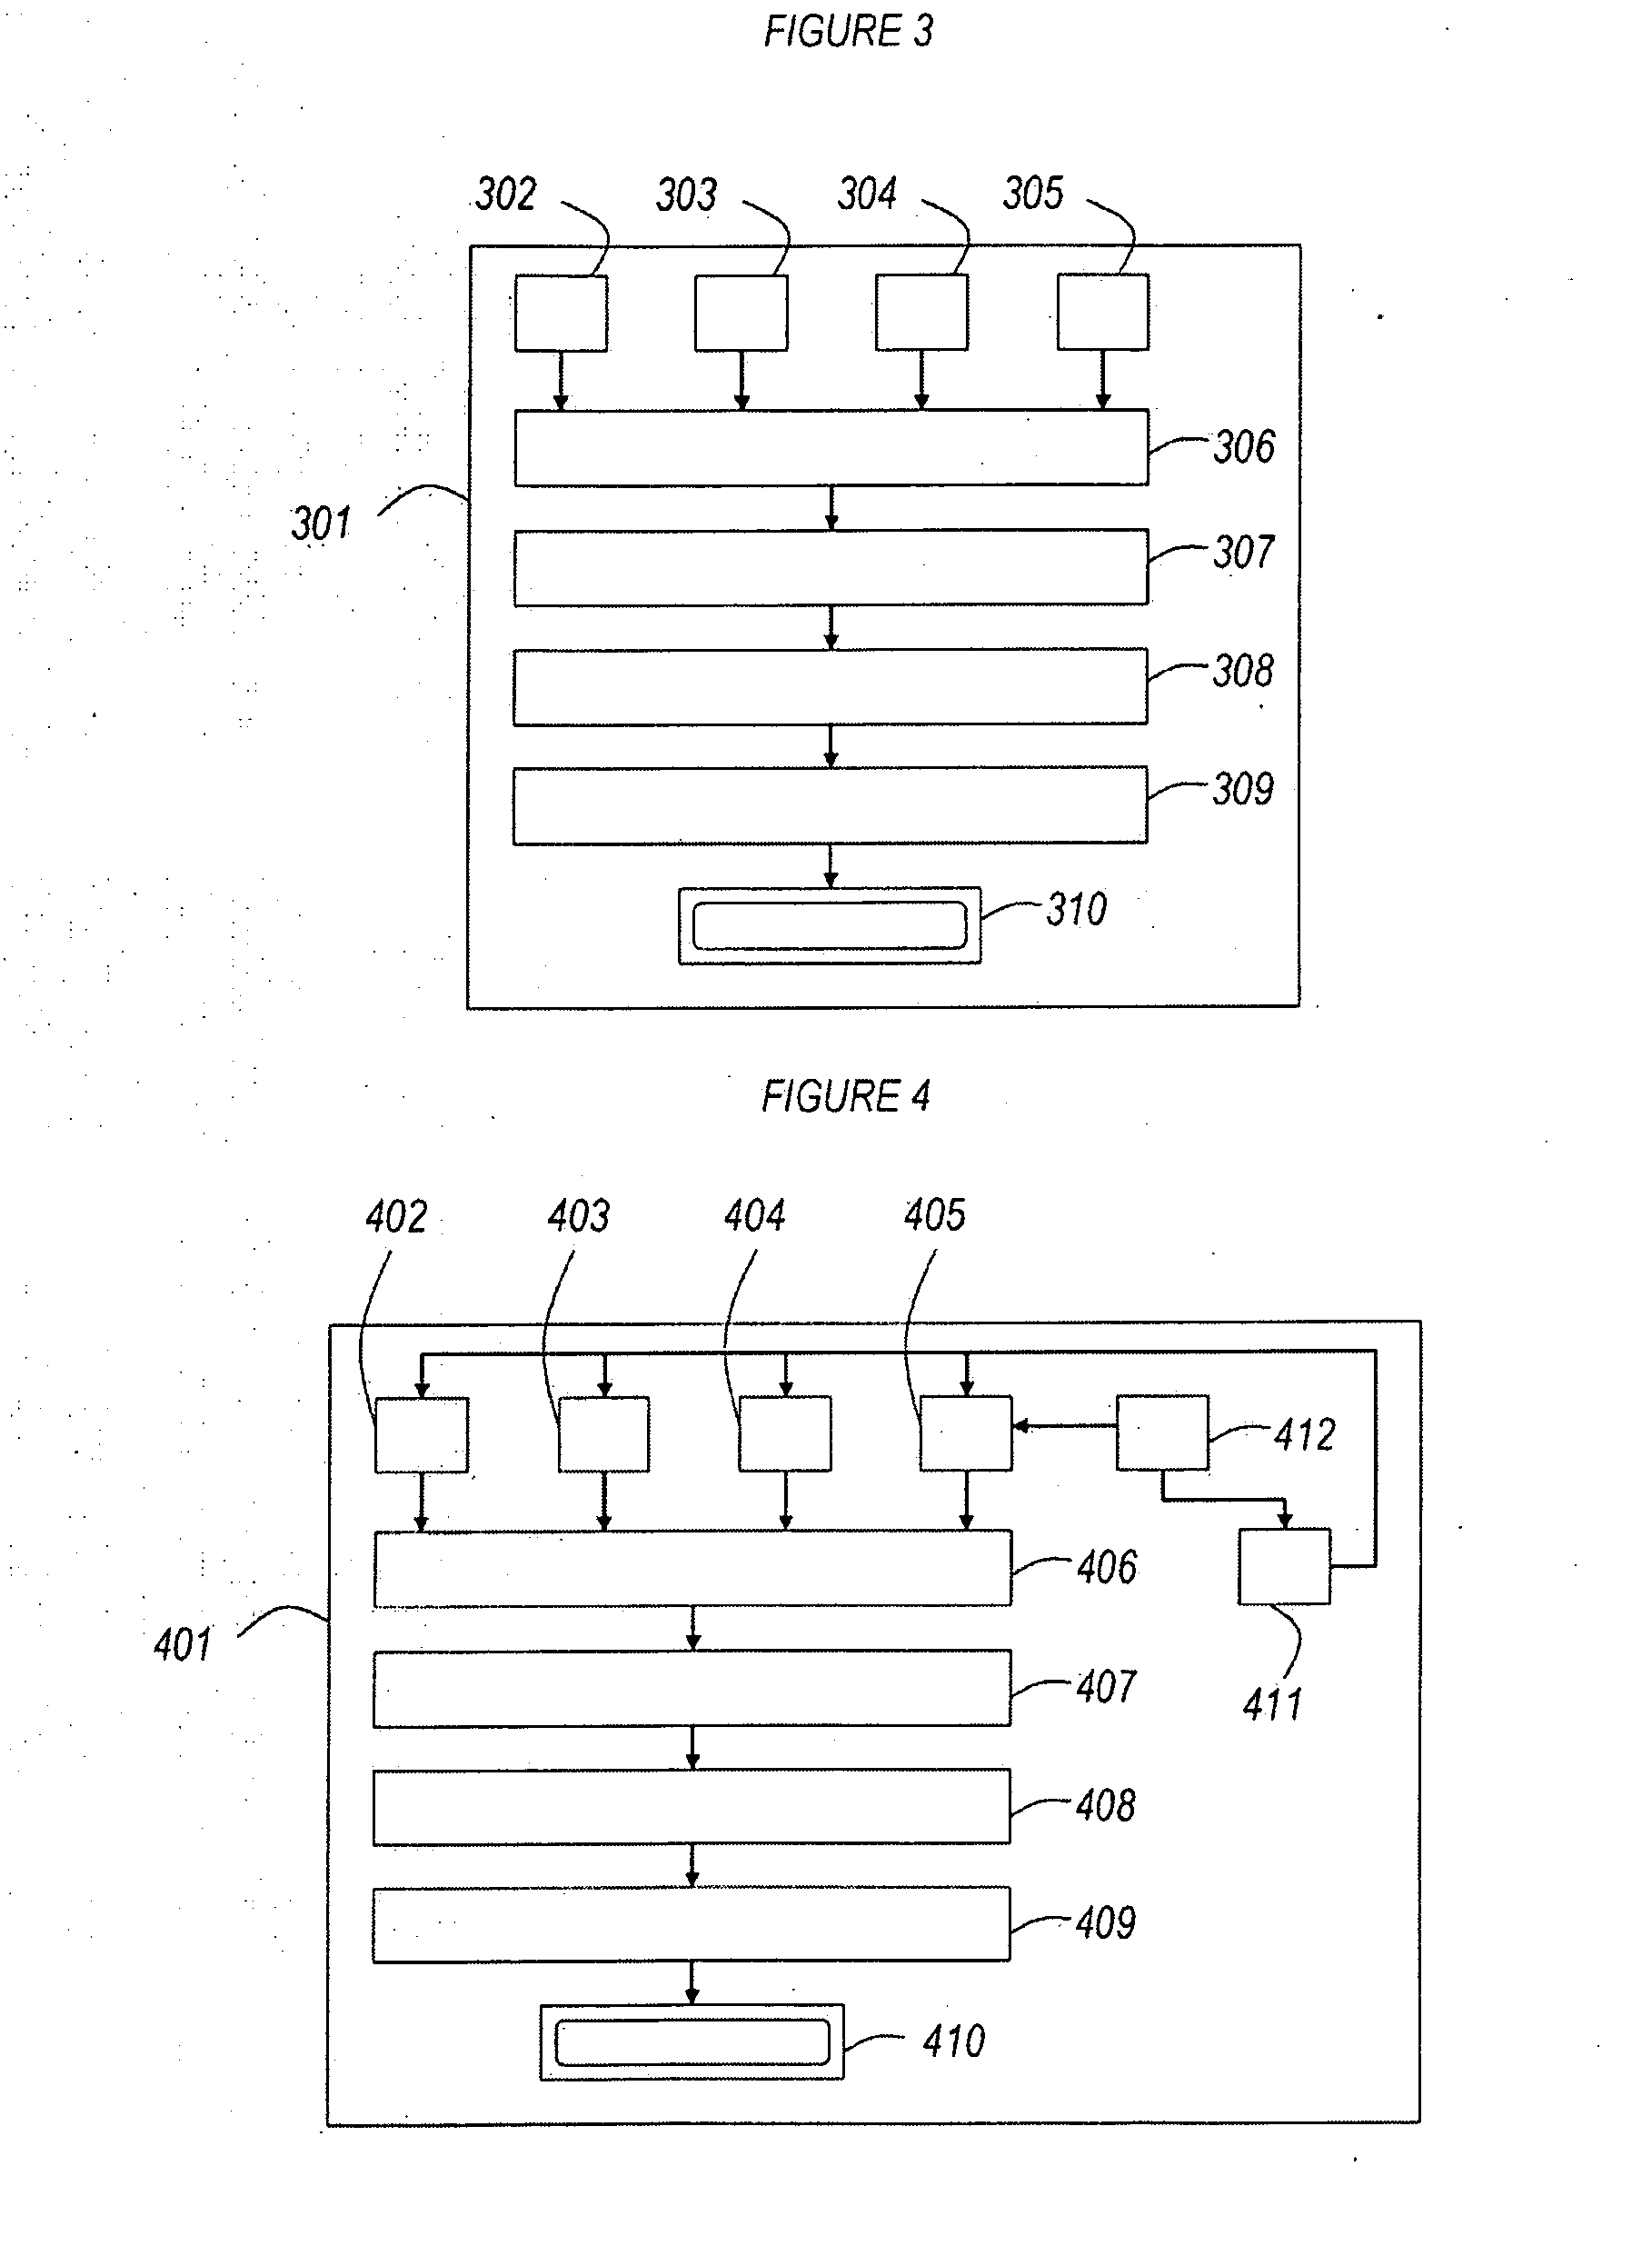 Method for transmission of a digital message from a display to a handheld receiver